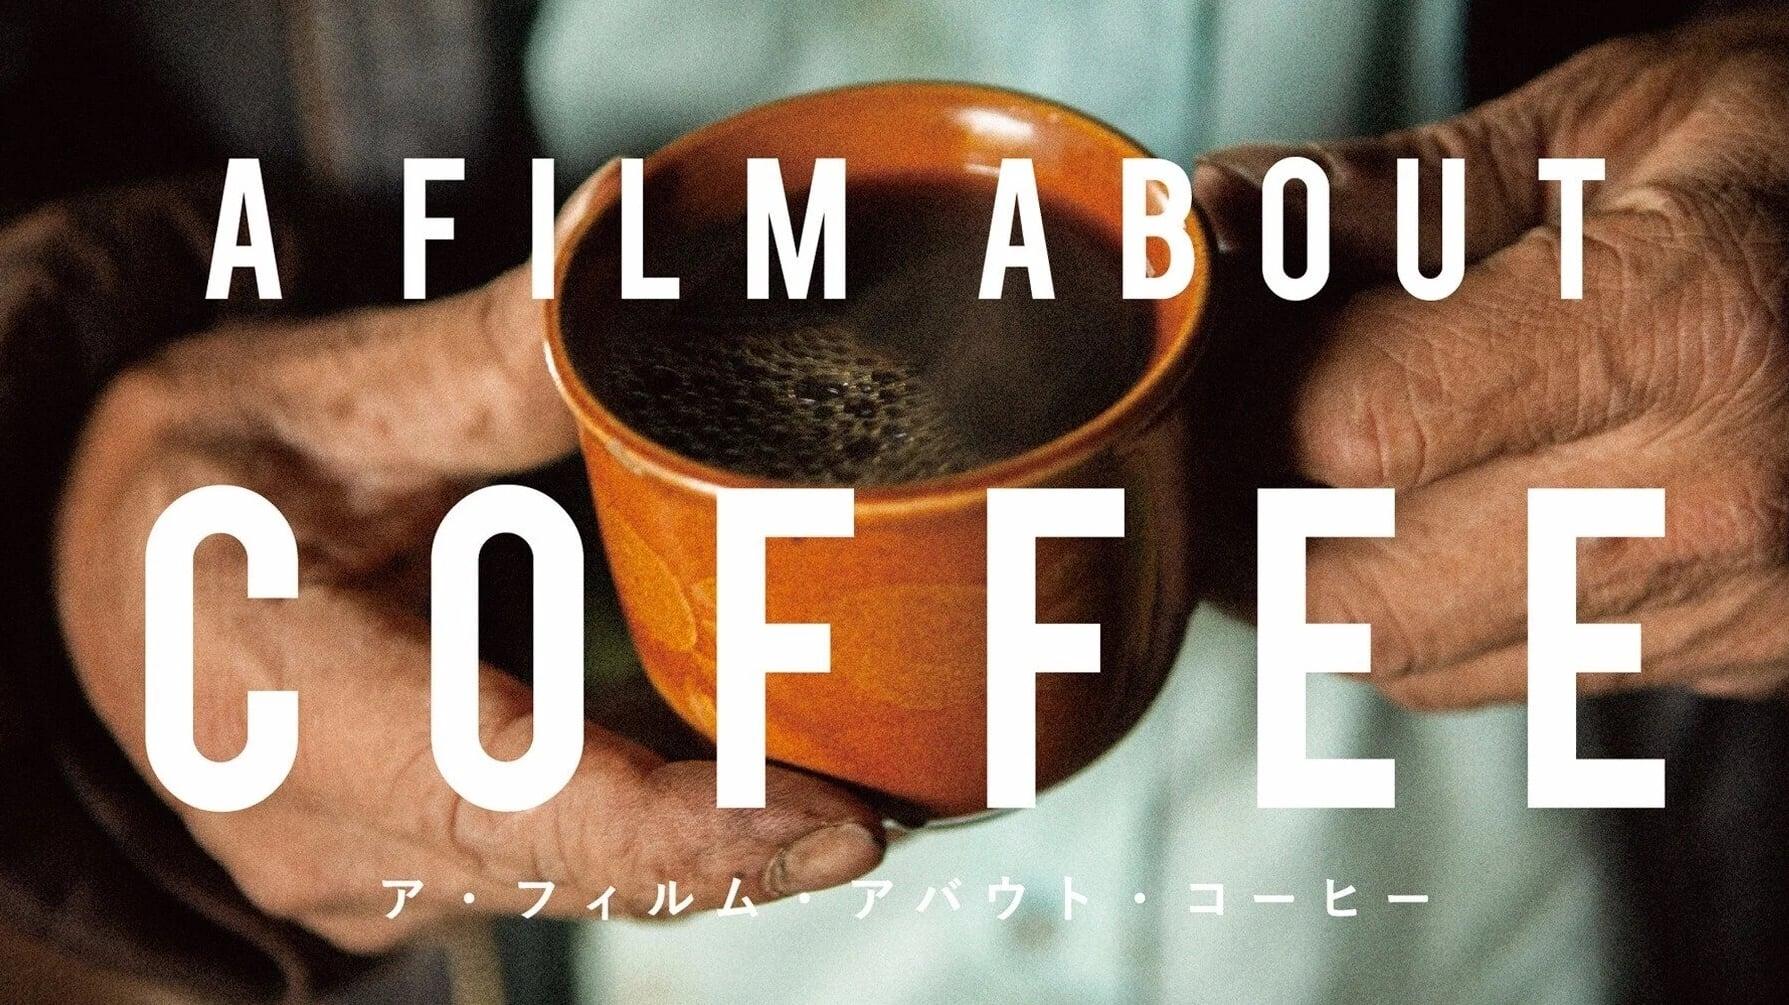 A Film About Coffee backdrop